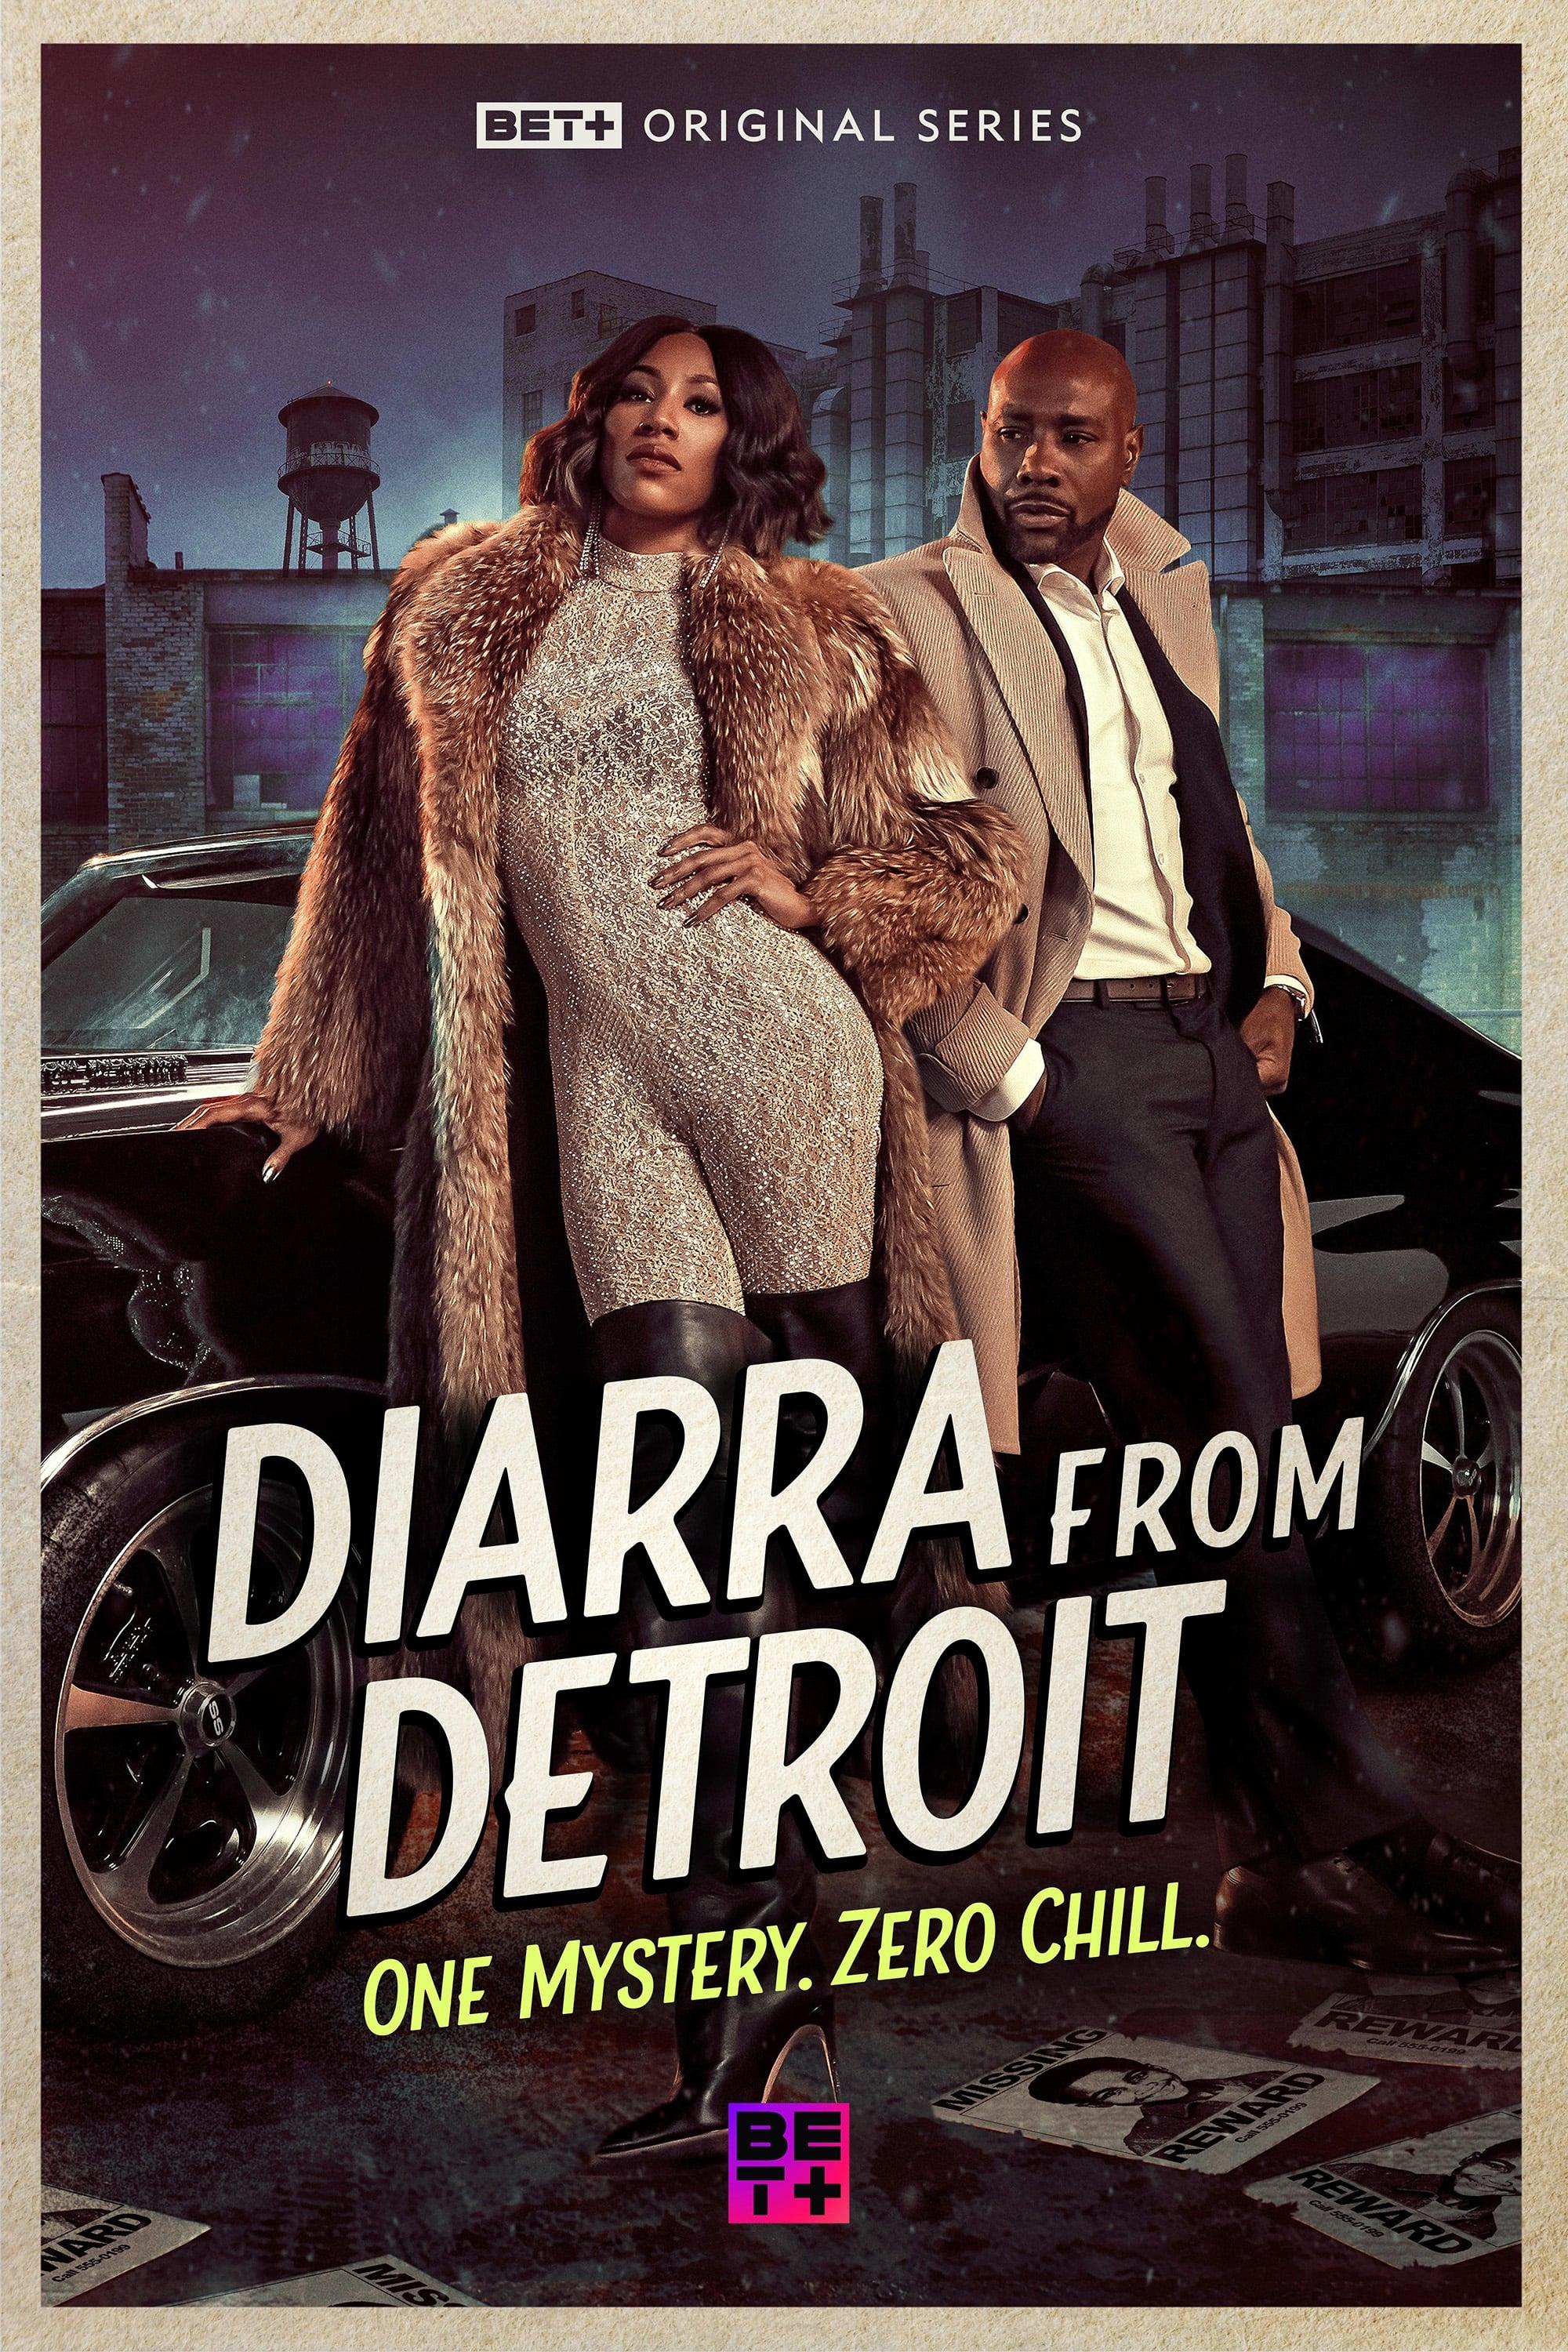 Diarra from Detroit poster